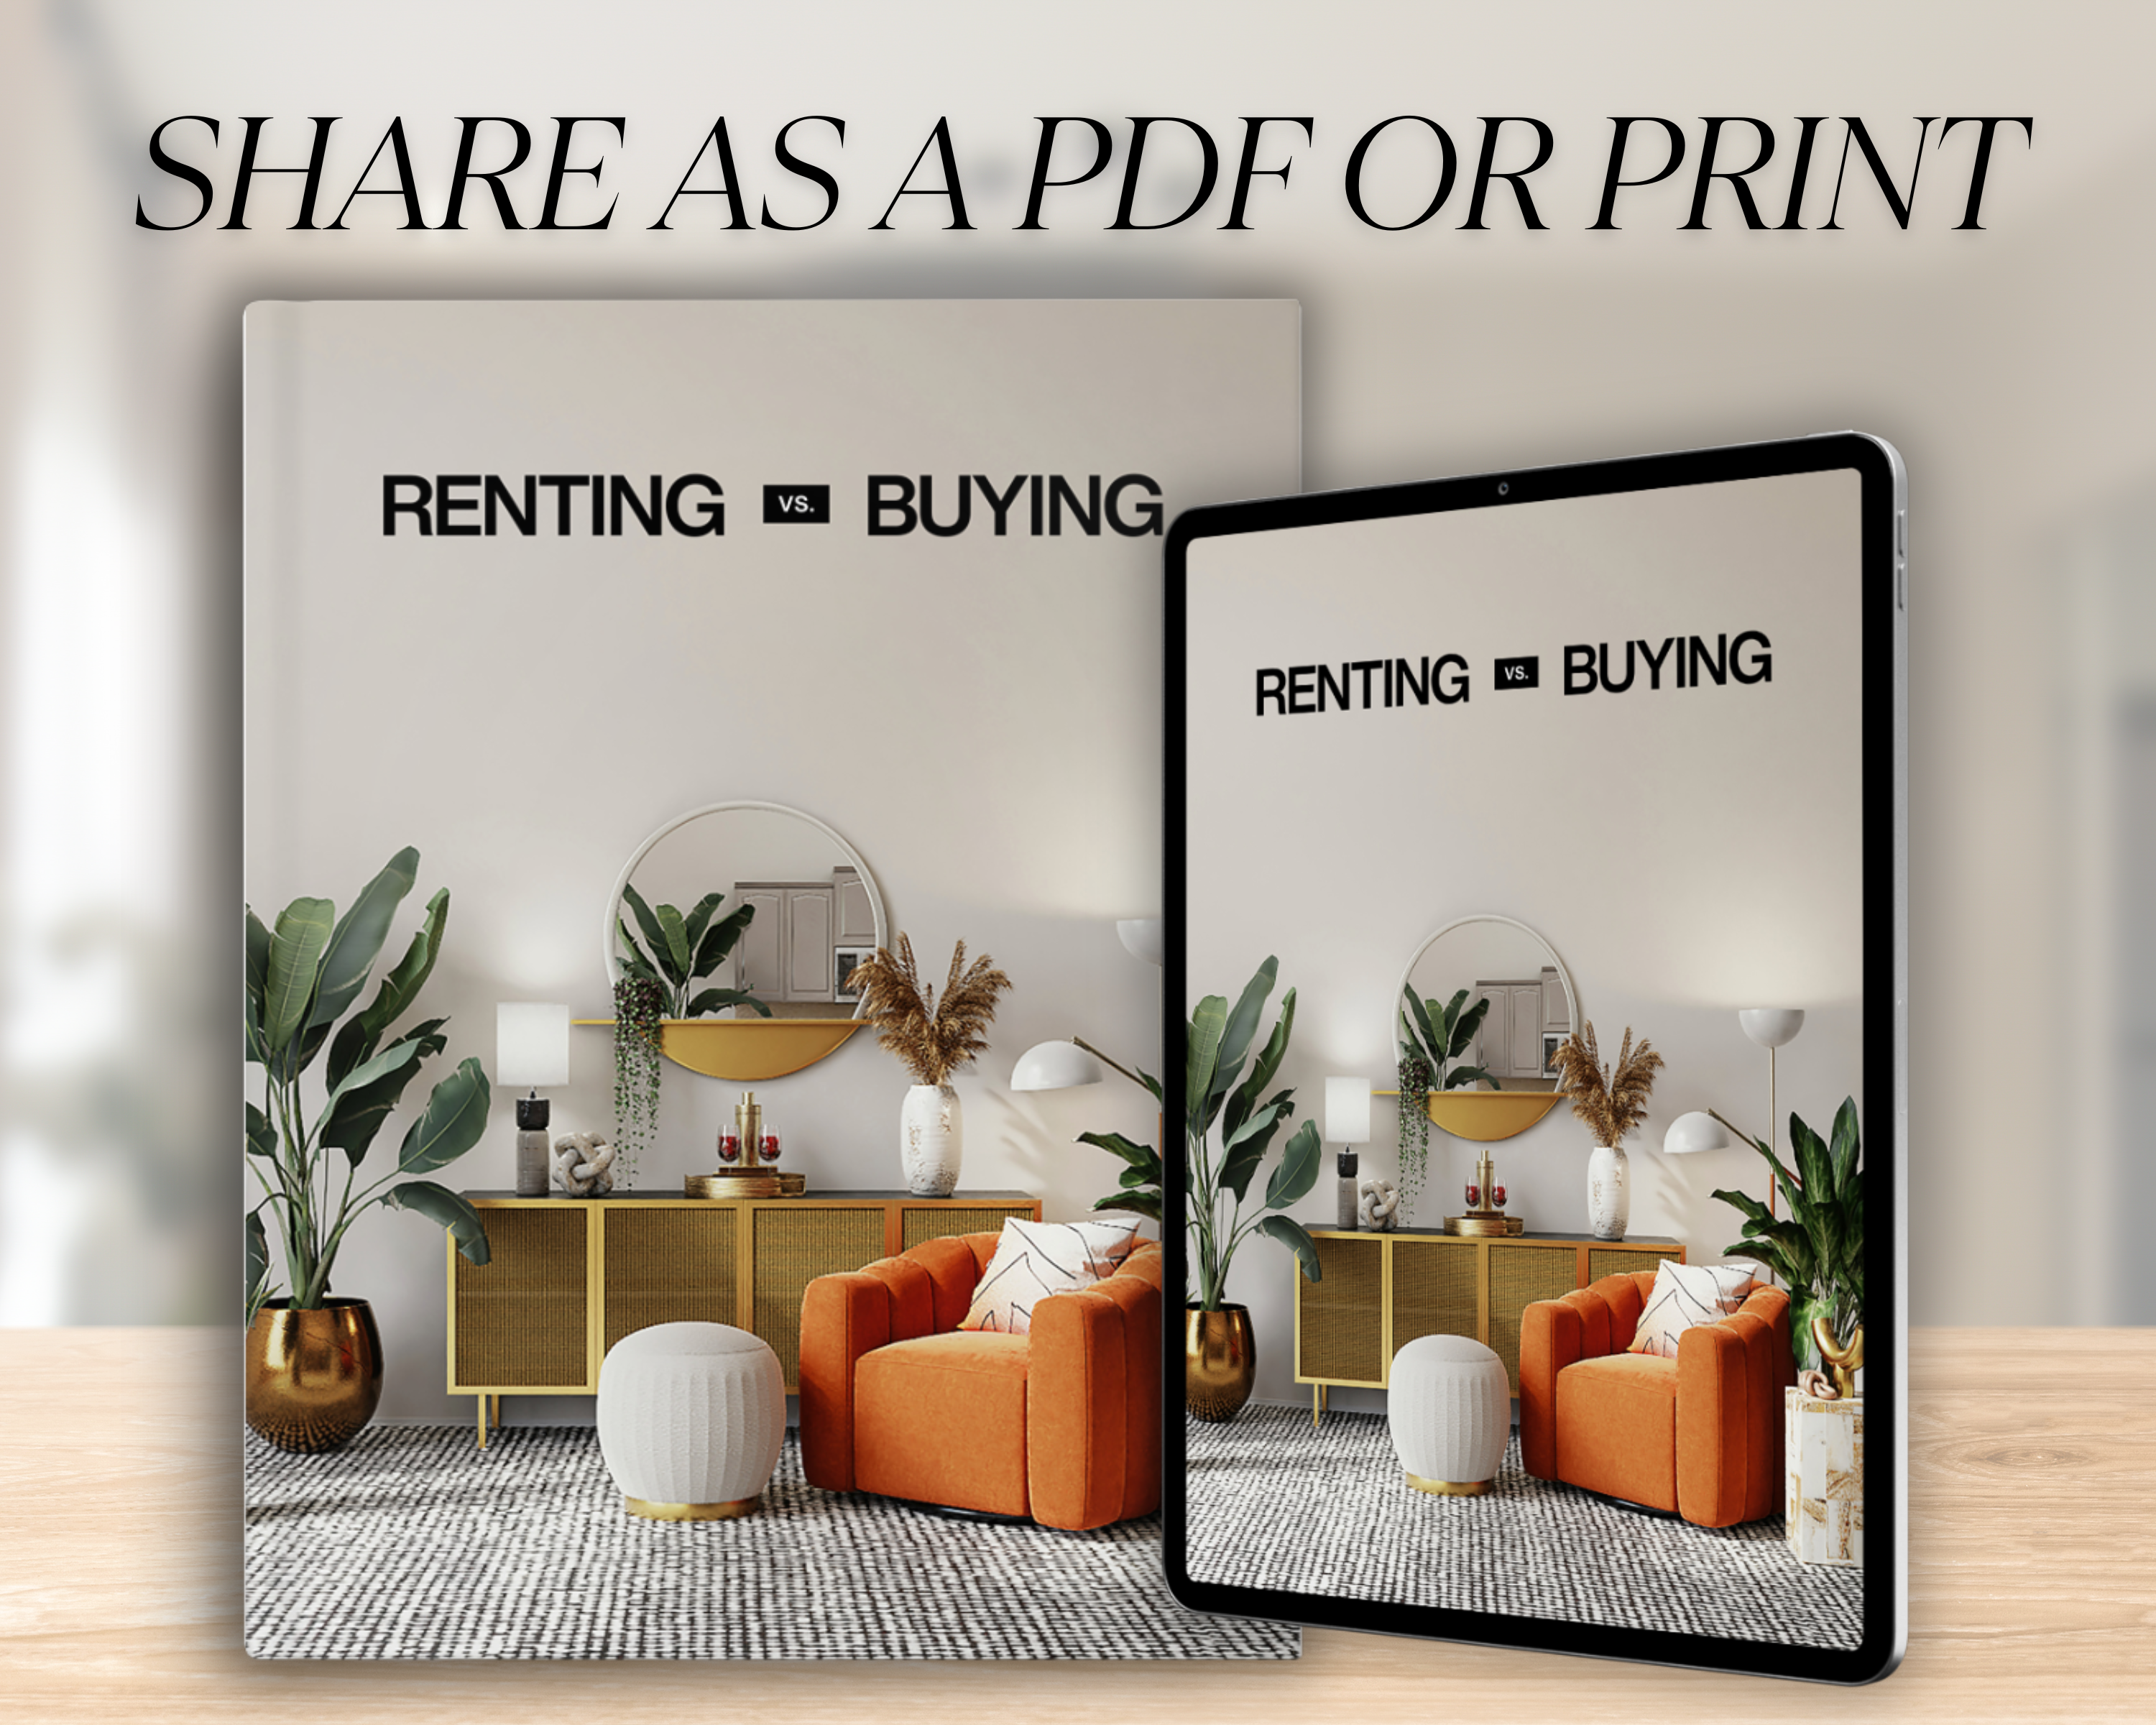 Real Estate Renting Vs. Buying Guide, Real Estate Marketing, Home Buyer Guide, Real Estate Template, Realtor Flyer, Rental Property, Canva Template